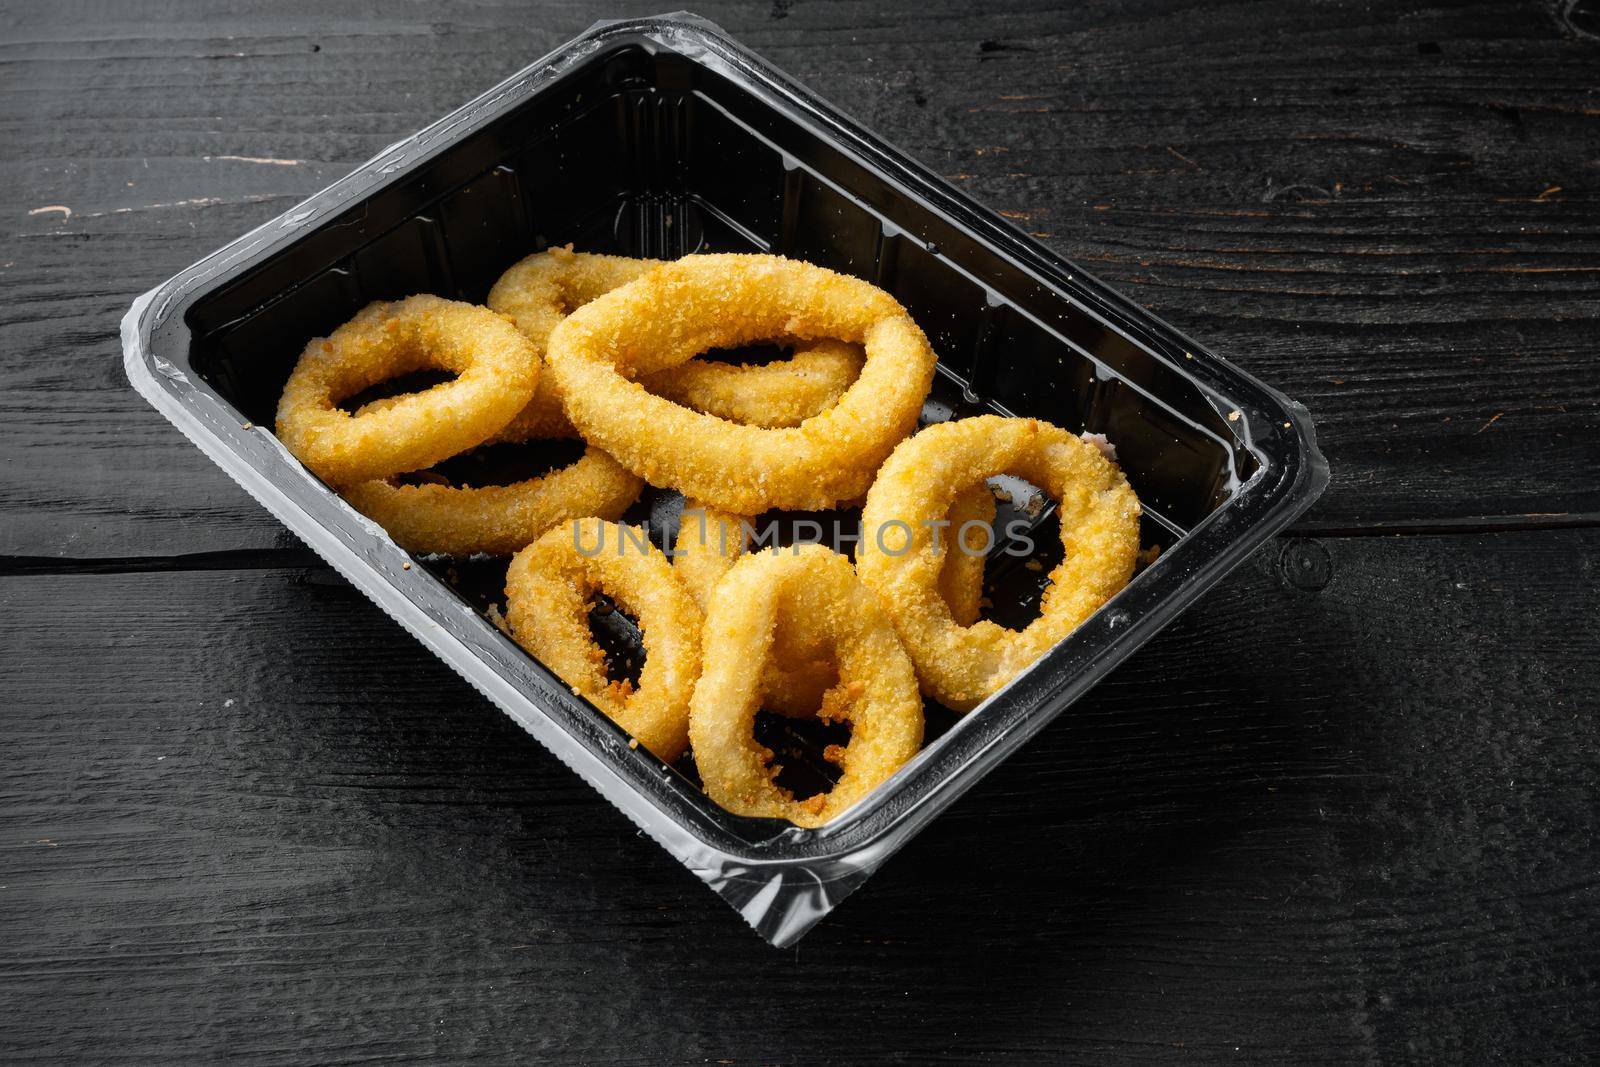 Heap of deep fried squid or onion rings package, on black wooden table background, with copy space for text by Ilianesolenyi